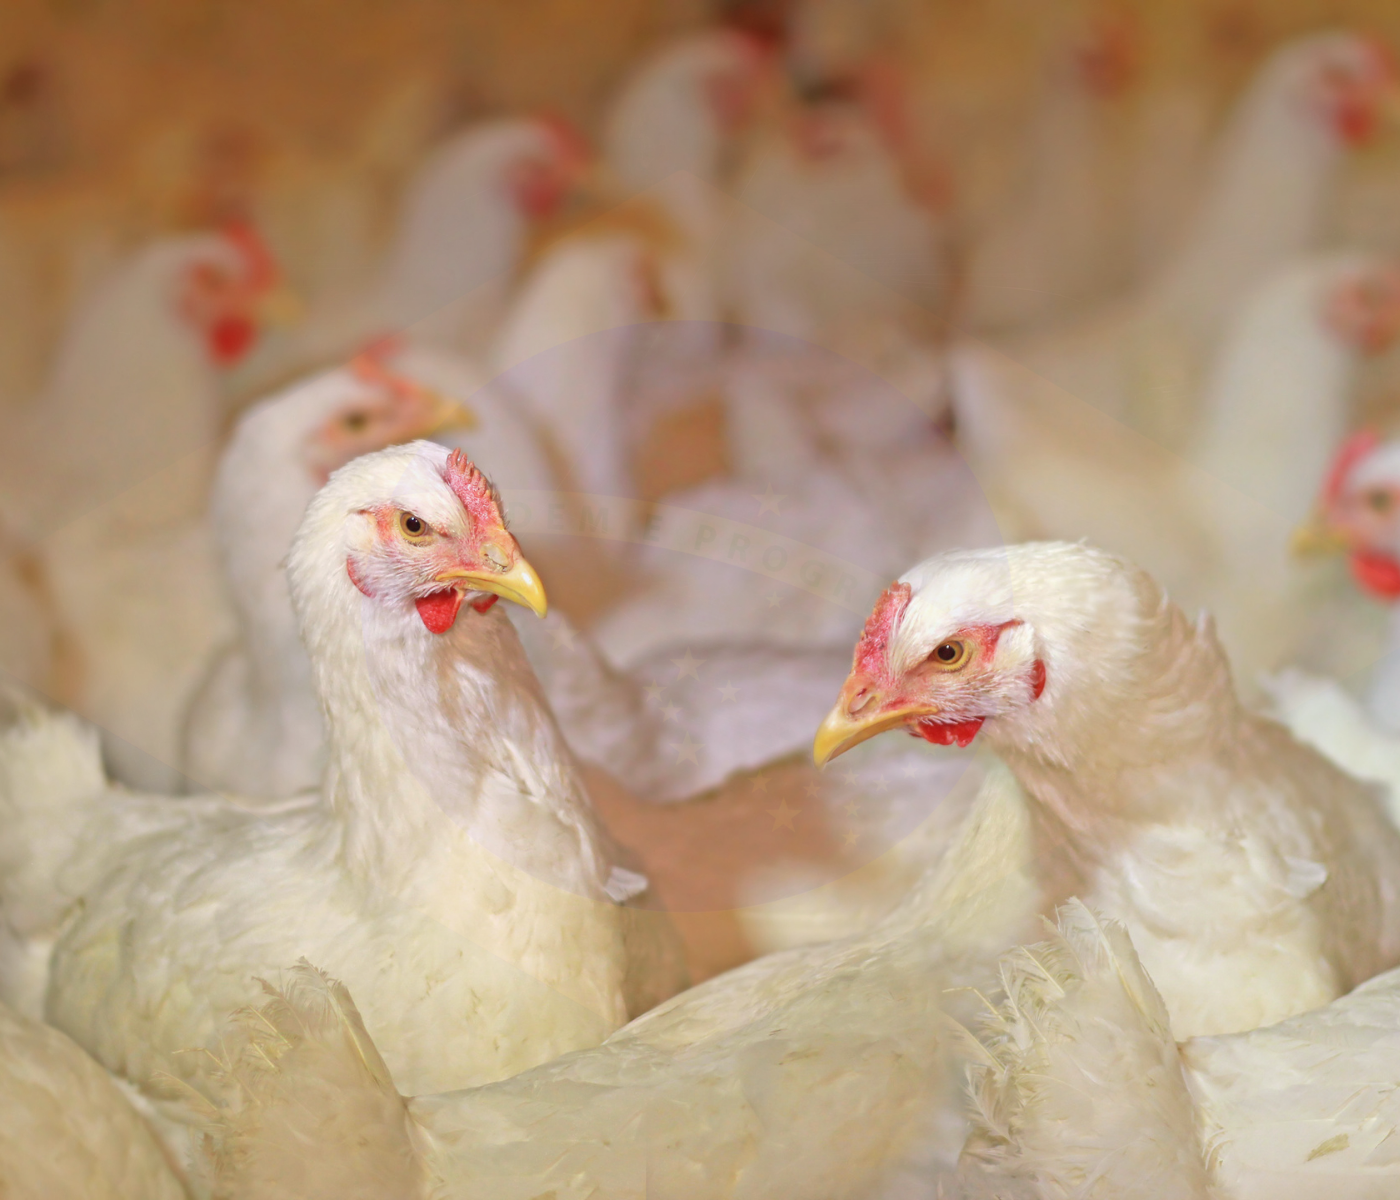 Brazil chicken production will steadily increase in 2022: USDA